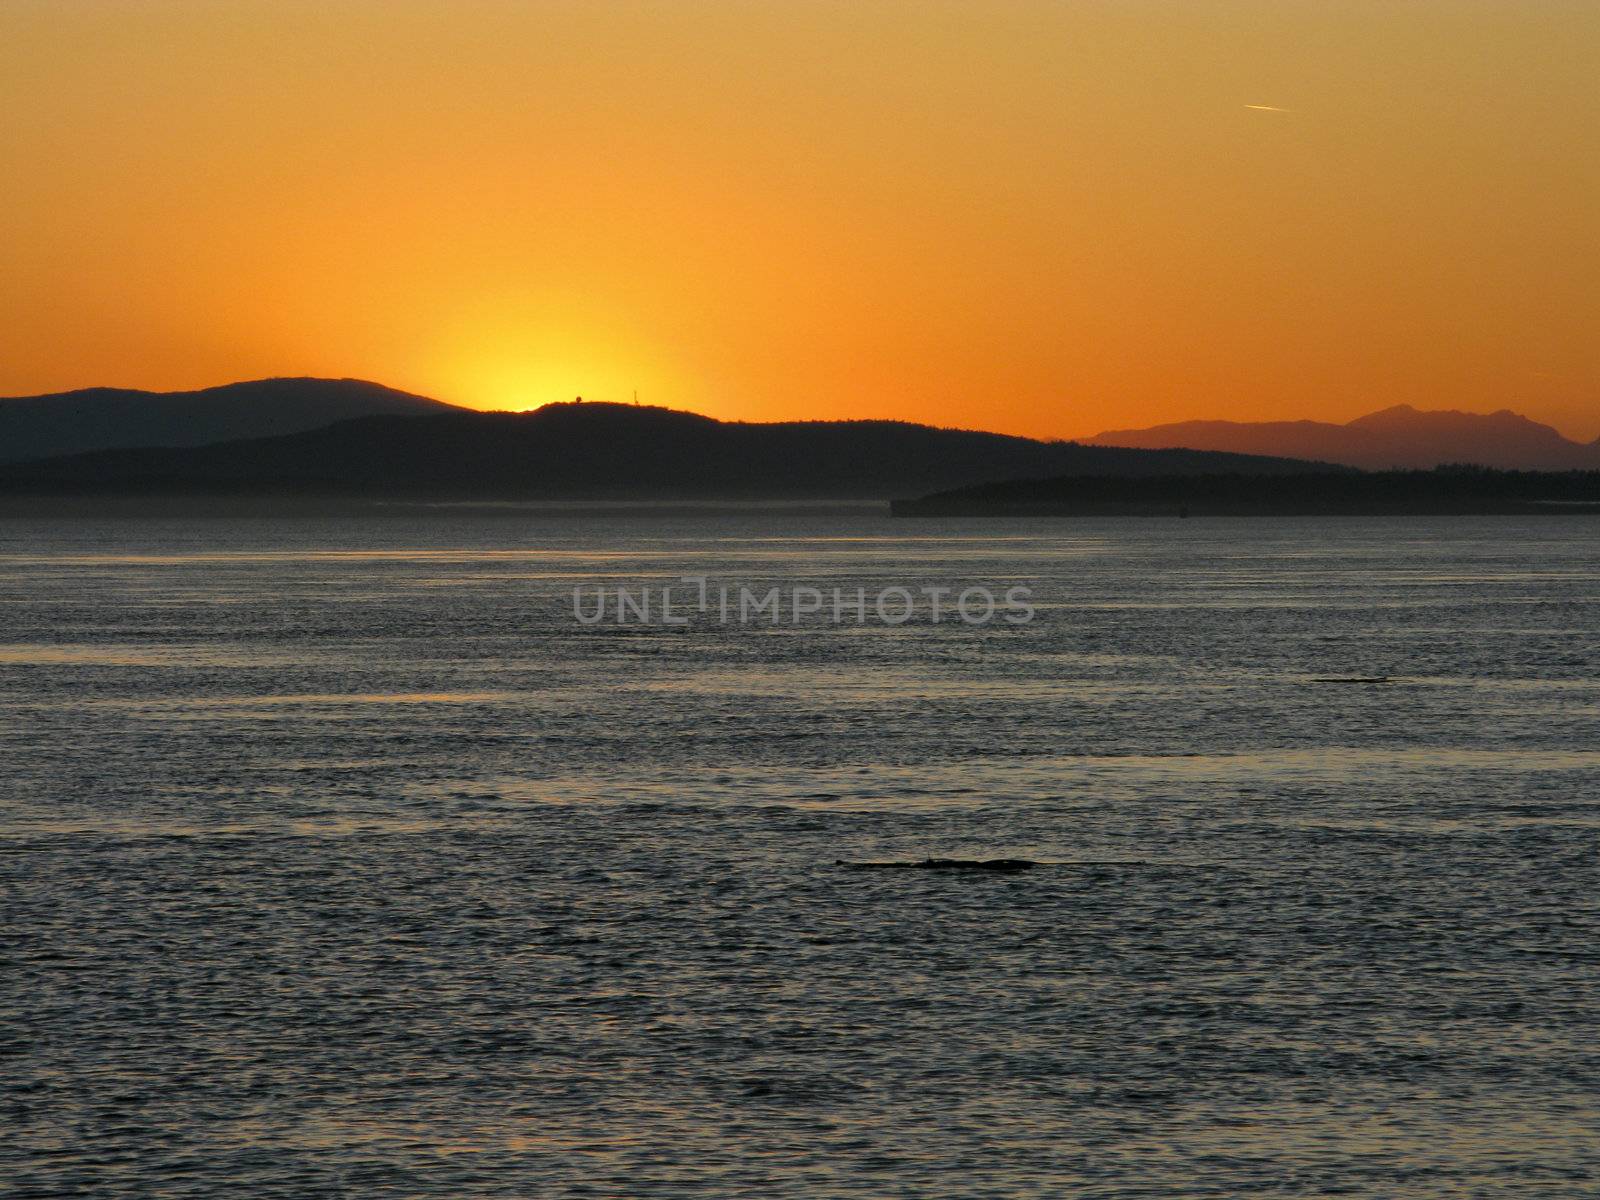 Sunset over the pacific with mountain range in background